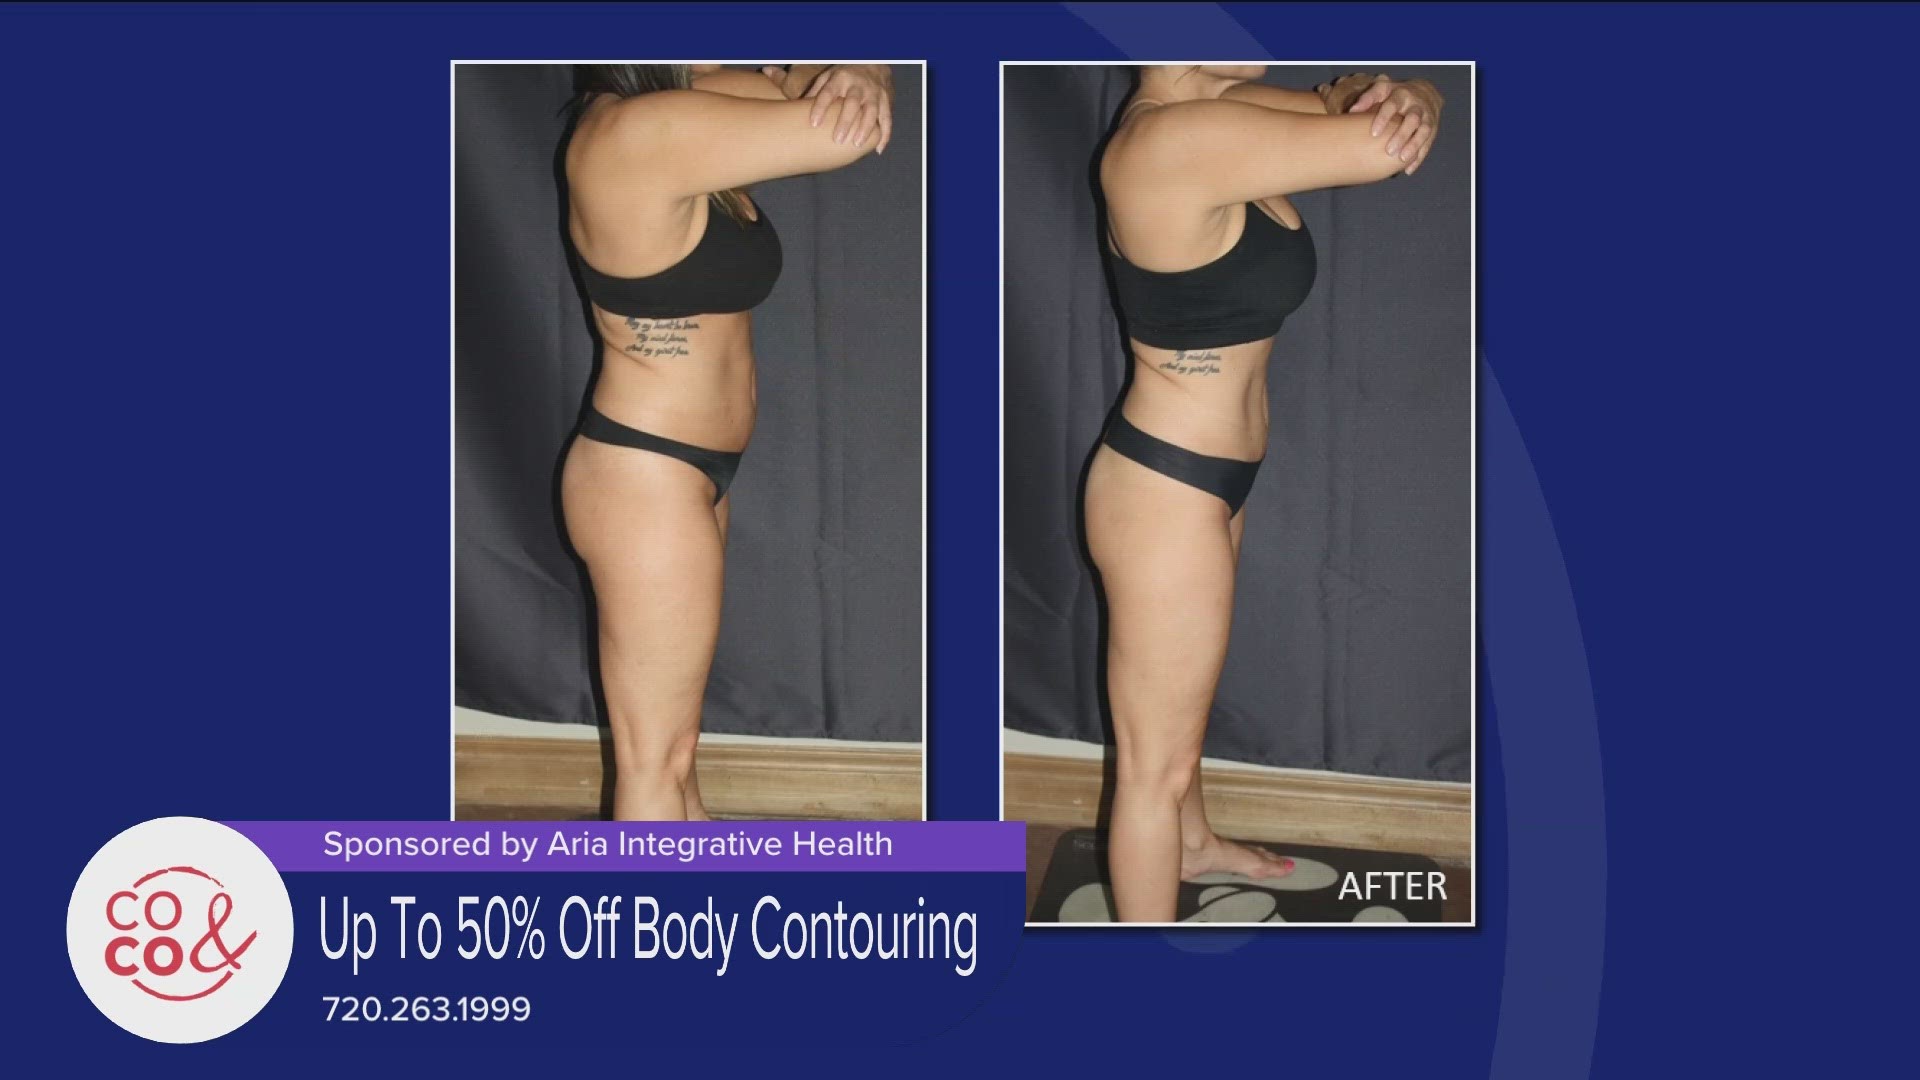 Get up to 50% off body contouring packages at Aria! Call 720.263.1999 or visit AriaIntegrativeHealth.com to learn more. **PAID CONTENT**